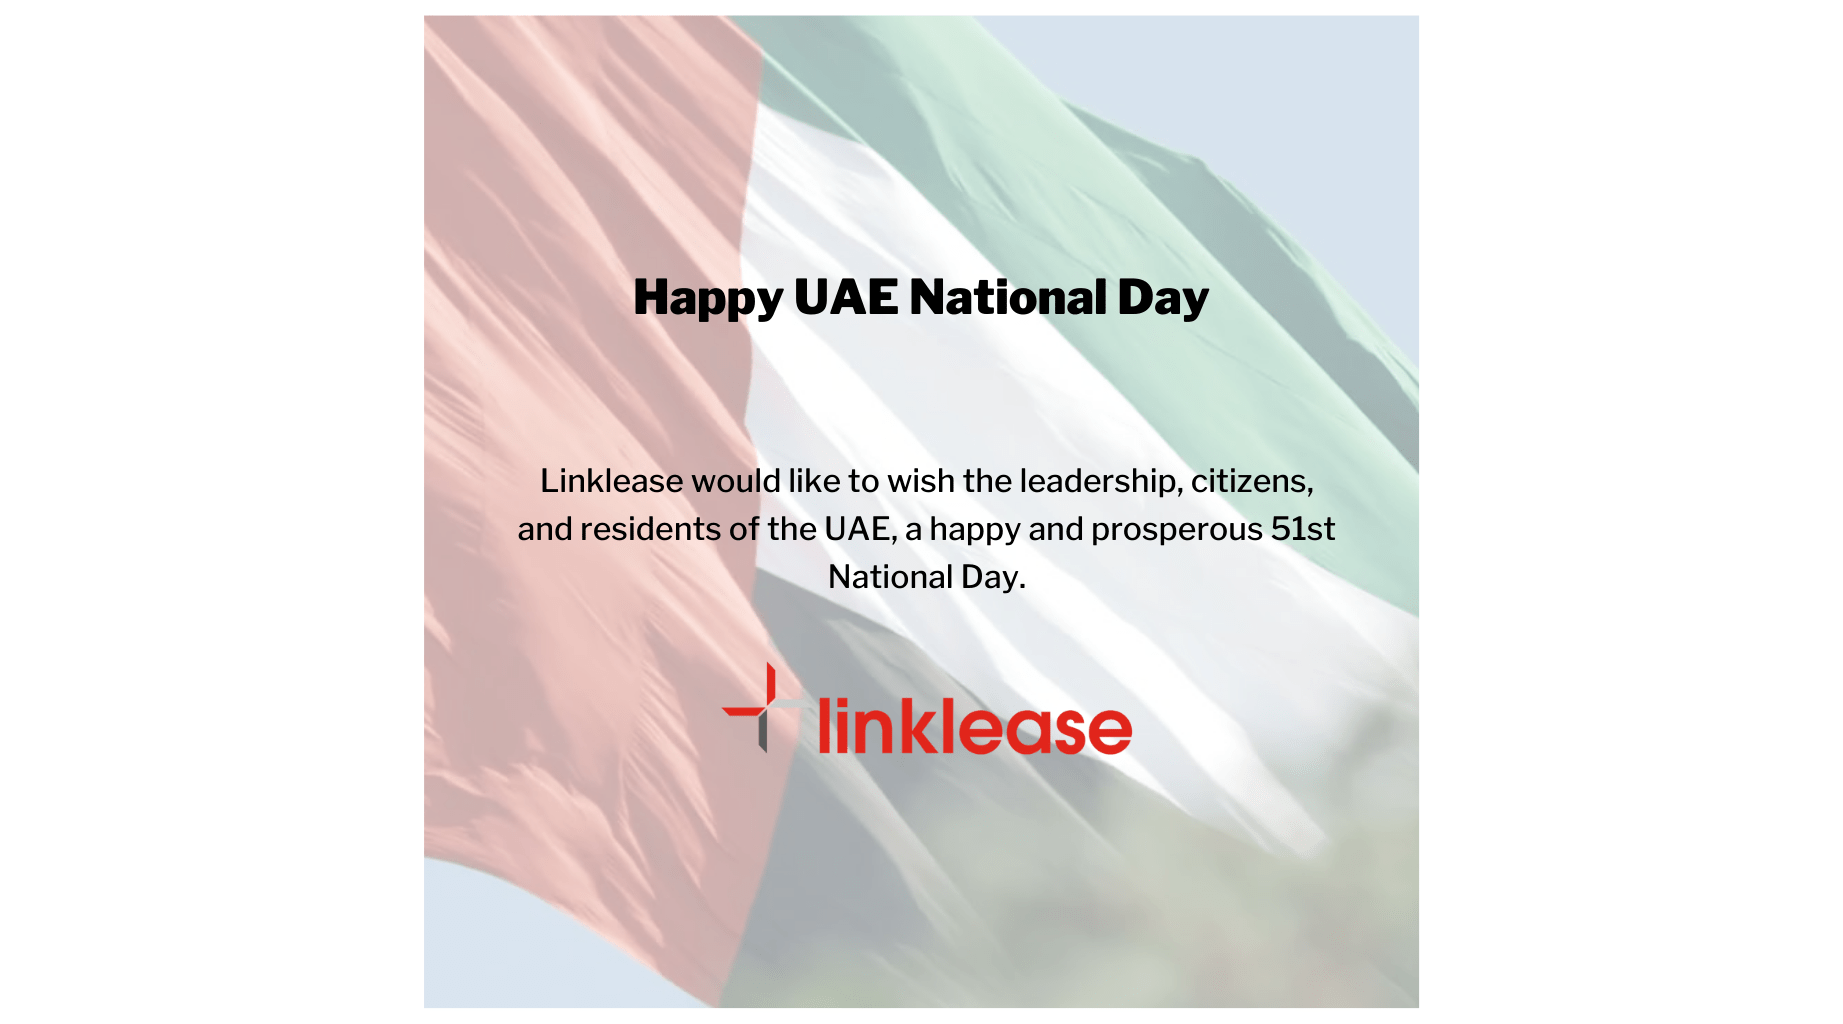 Linklease would like to wish the leadership, citizens, and residents of the UAE, a happy and prosperous 51st National Day. Happy UAE National Day